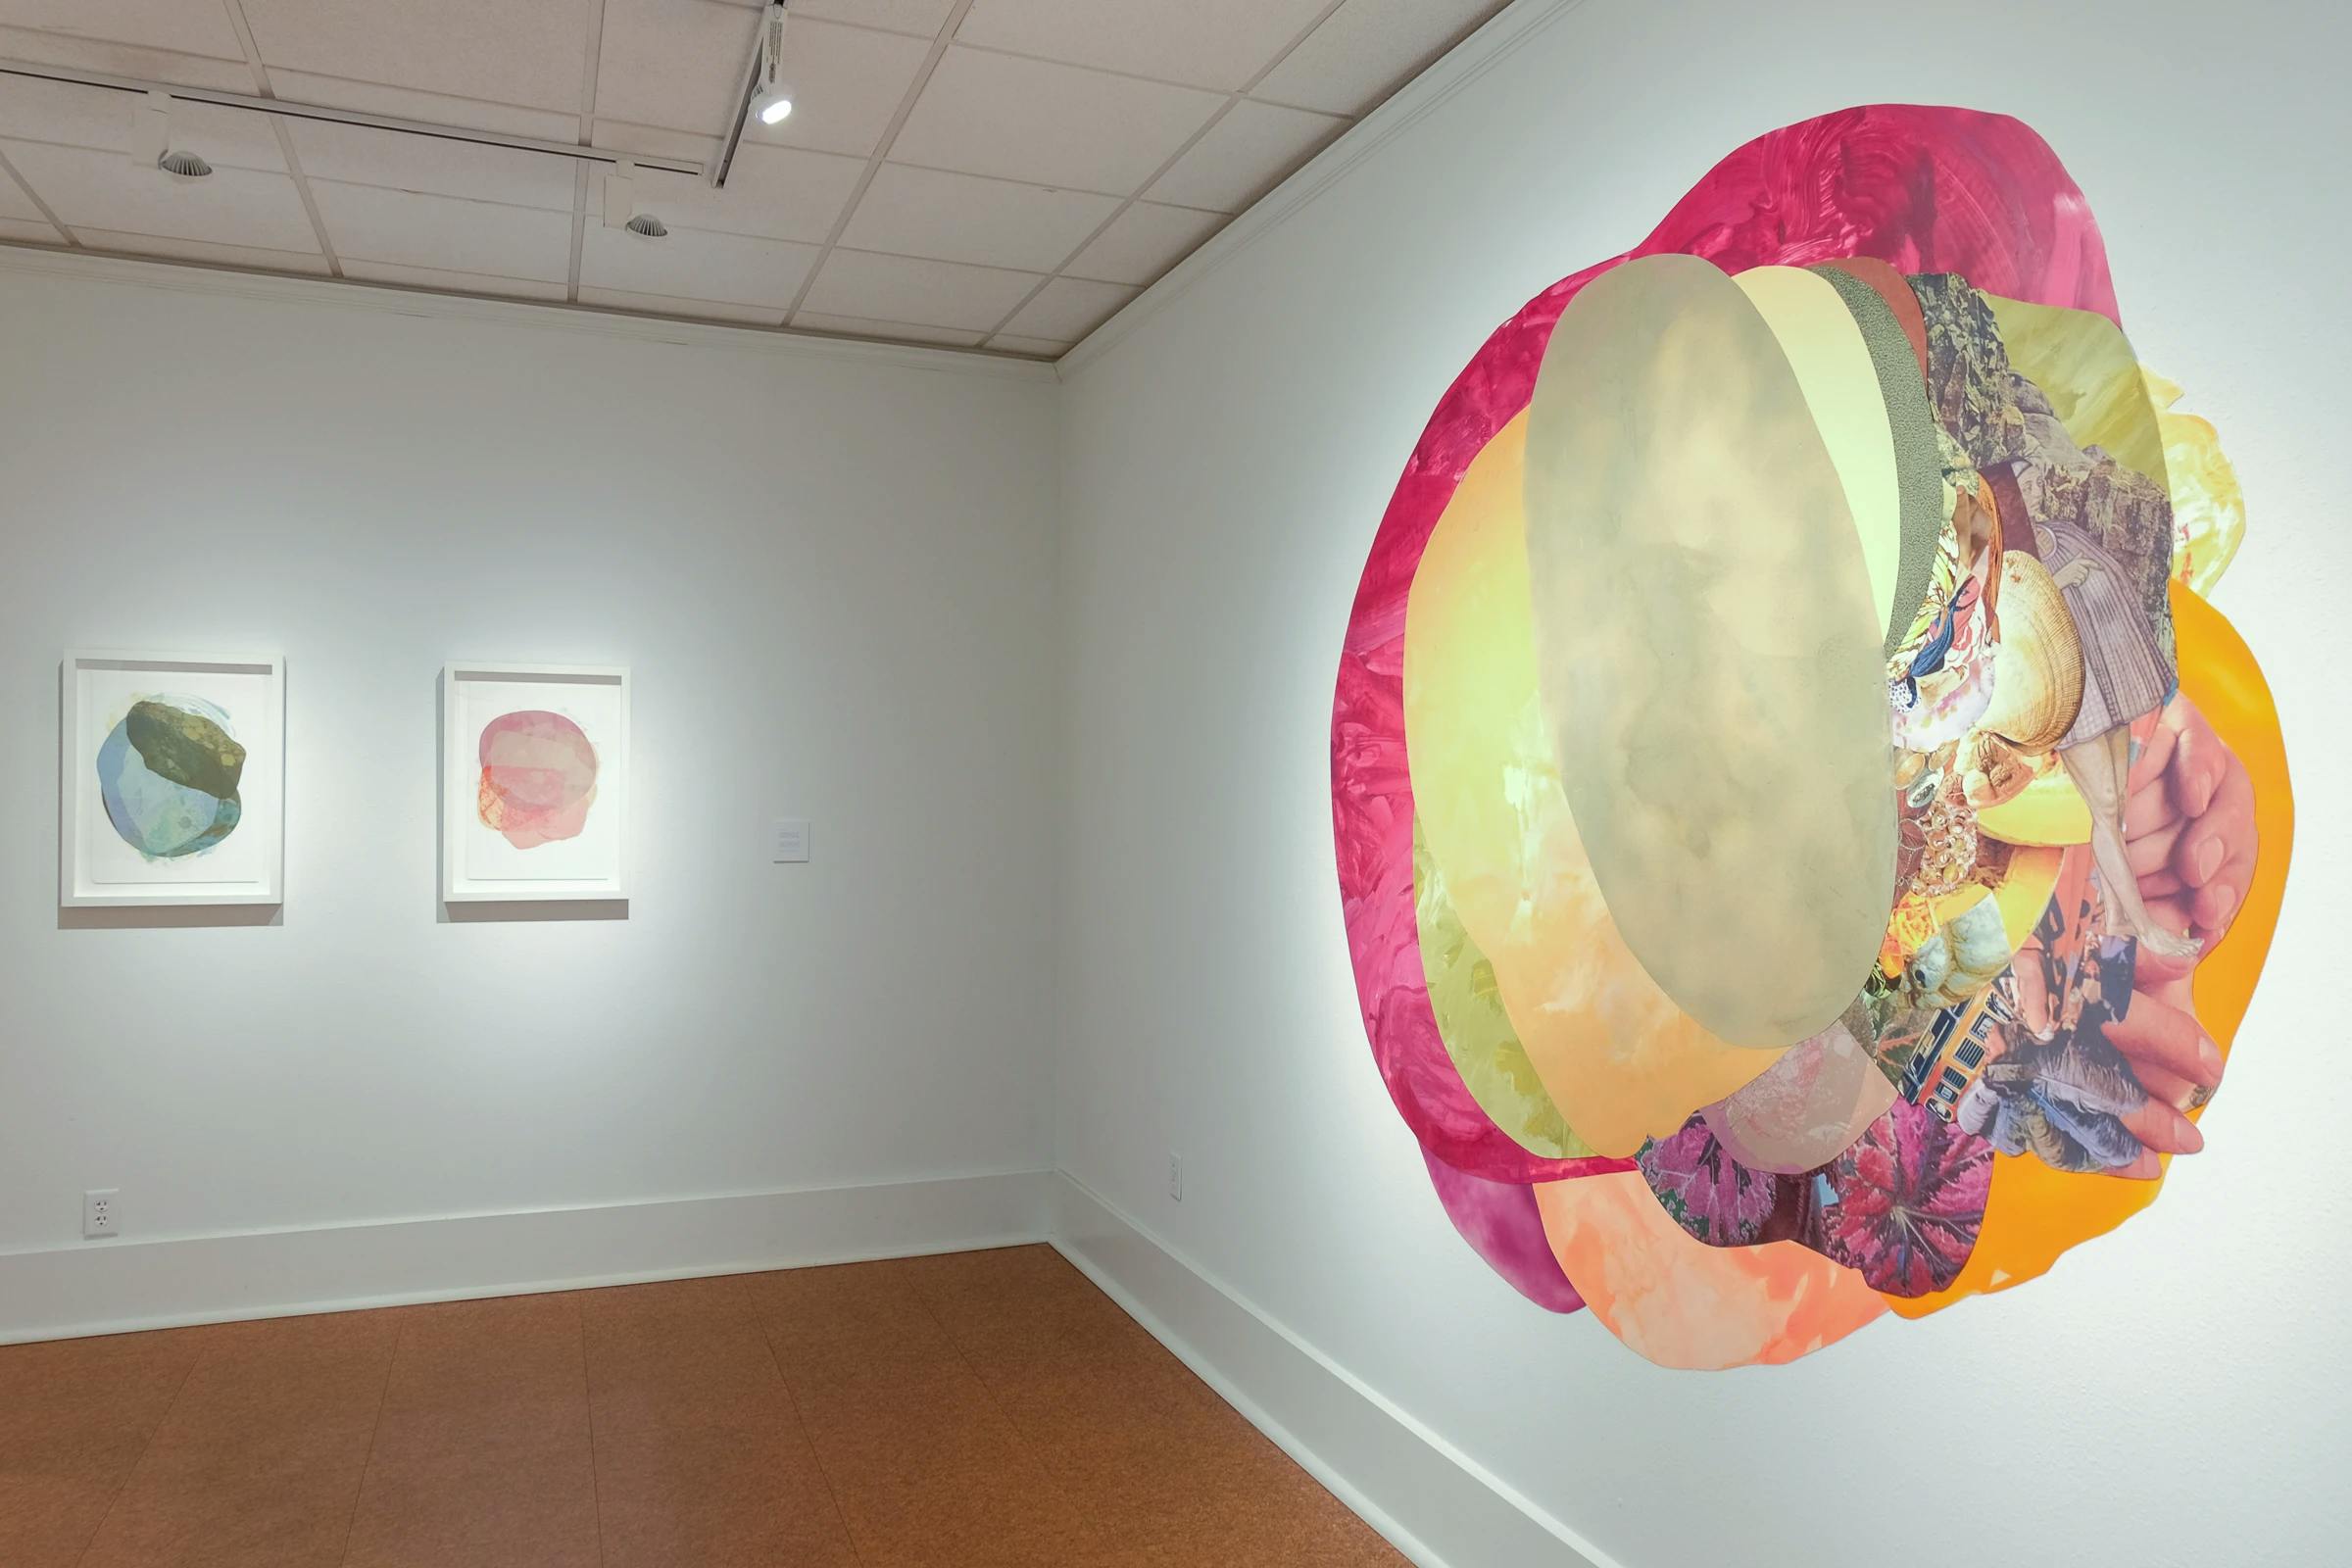 Three mixed-media collages by artist Xochi Solis, two framed and one large site-specific work, installed on a white wall in the Galveston Arts Center.